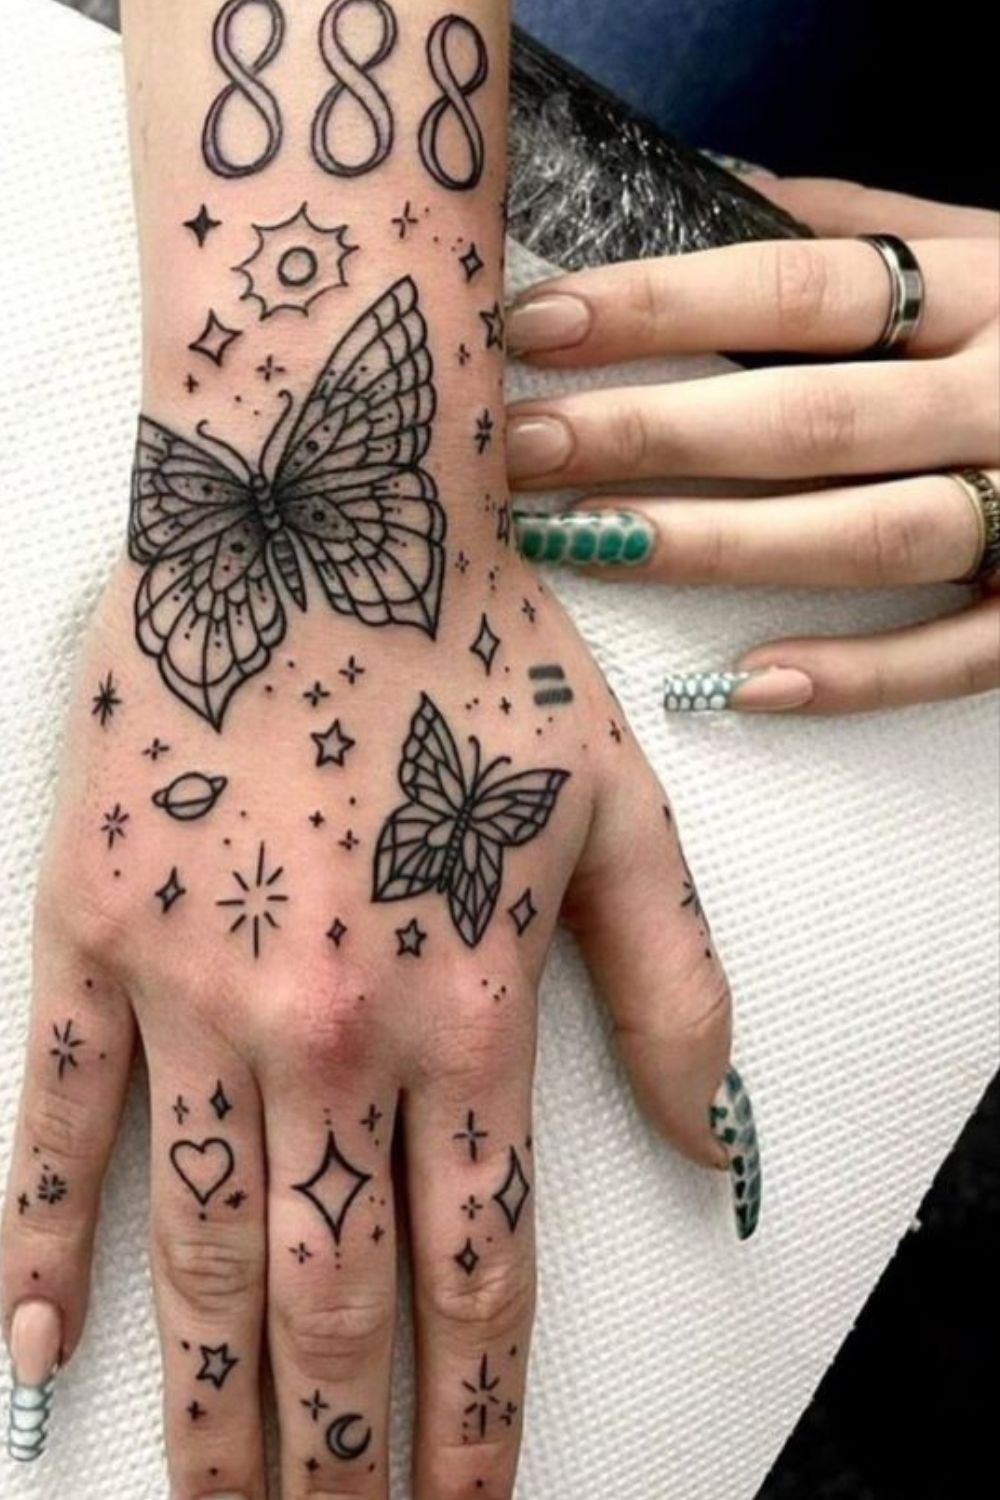 Cosmic Butterfly Hand Tattoo